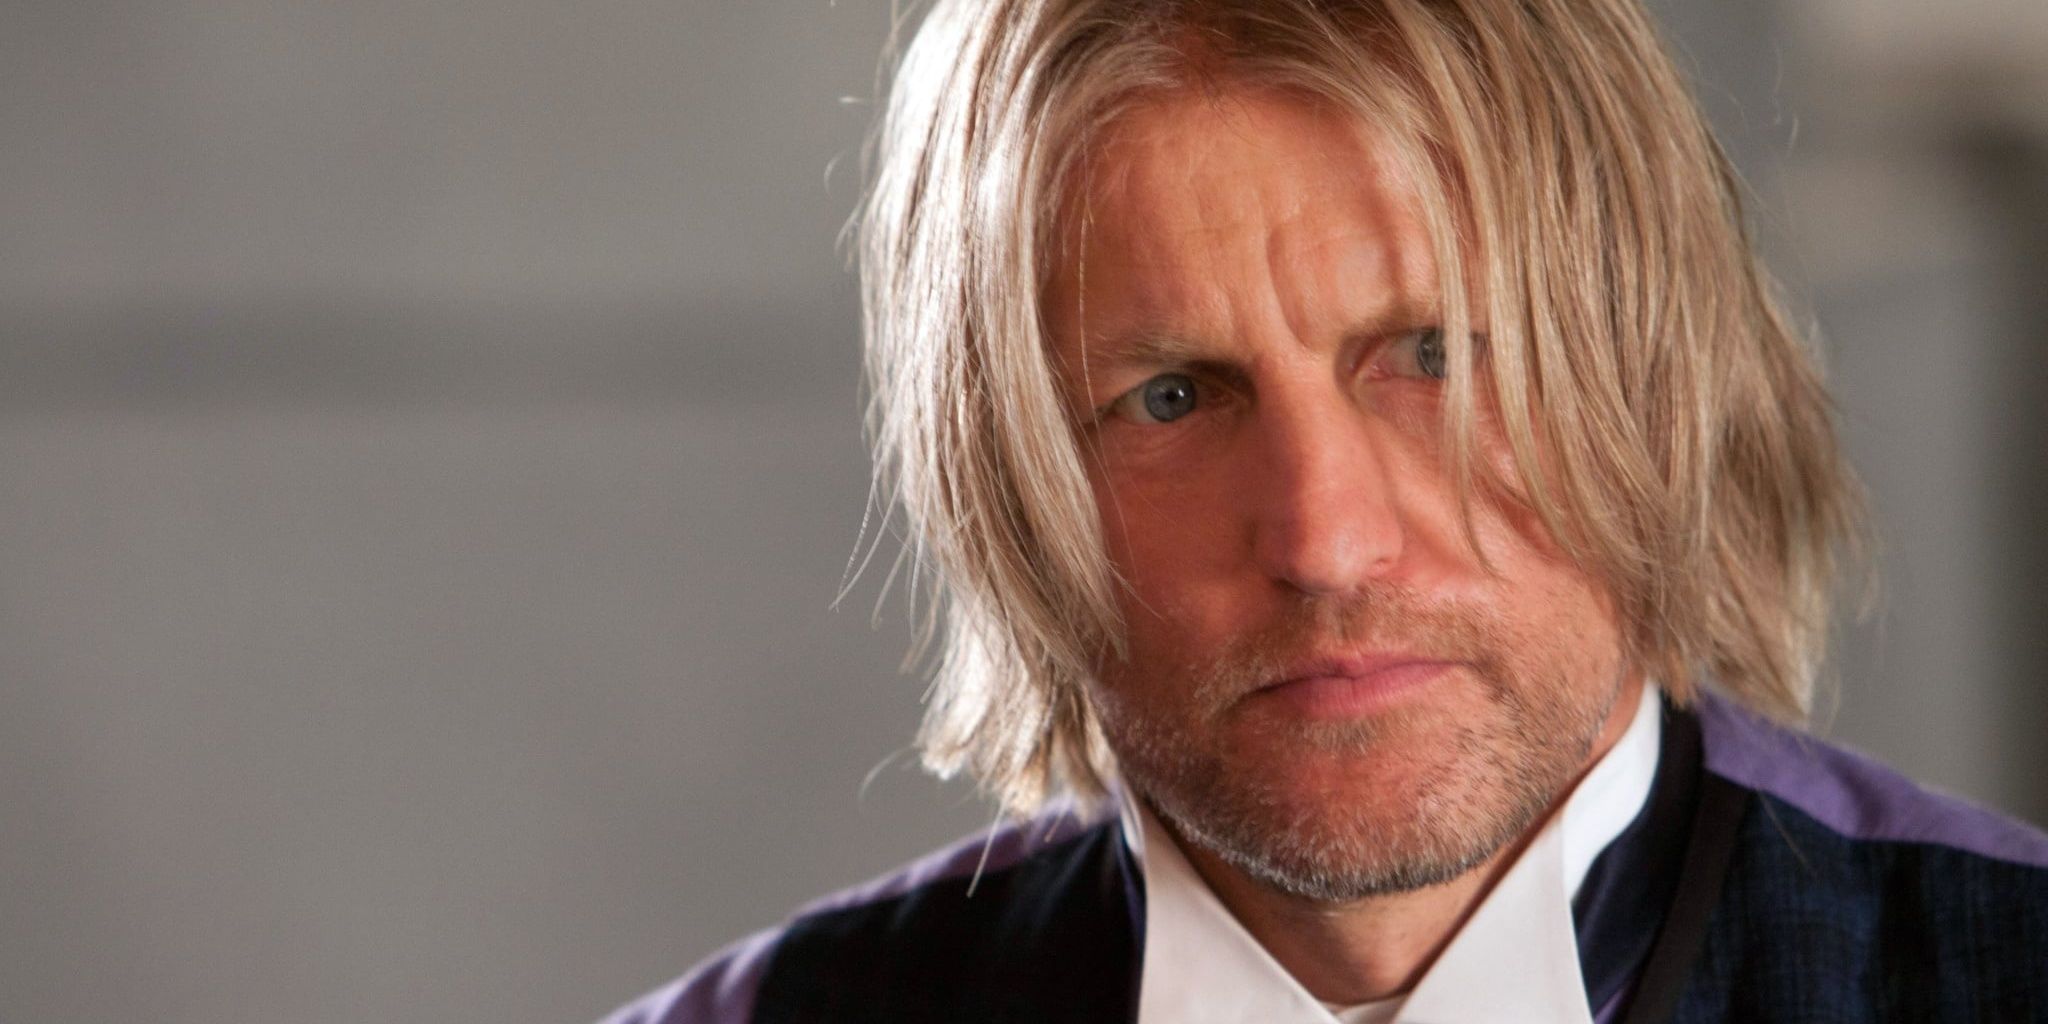 The Hunger Games 10 Things You Never Knew About Haymitch Abernathy